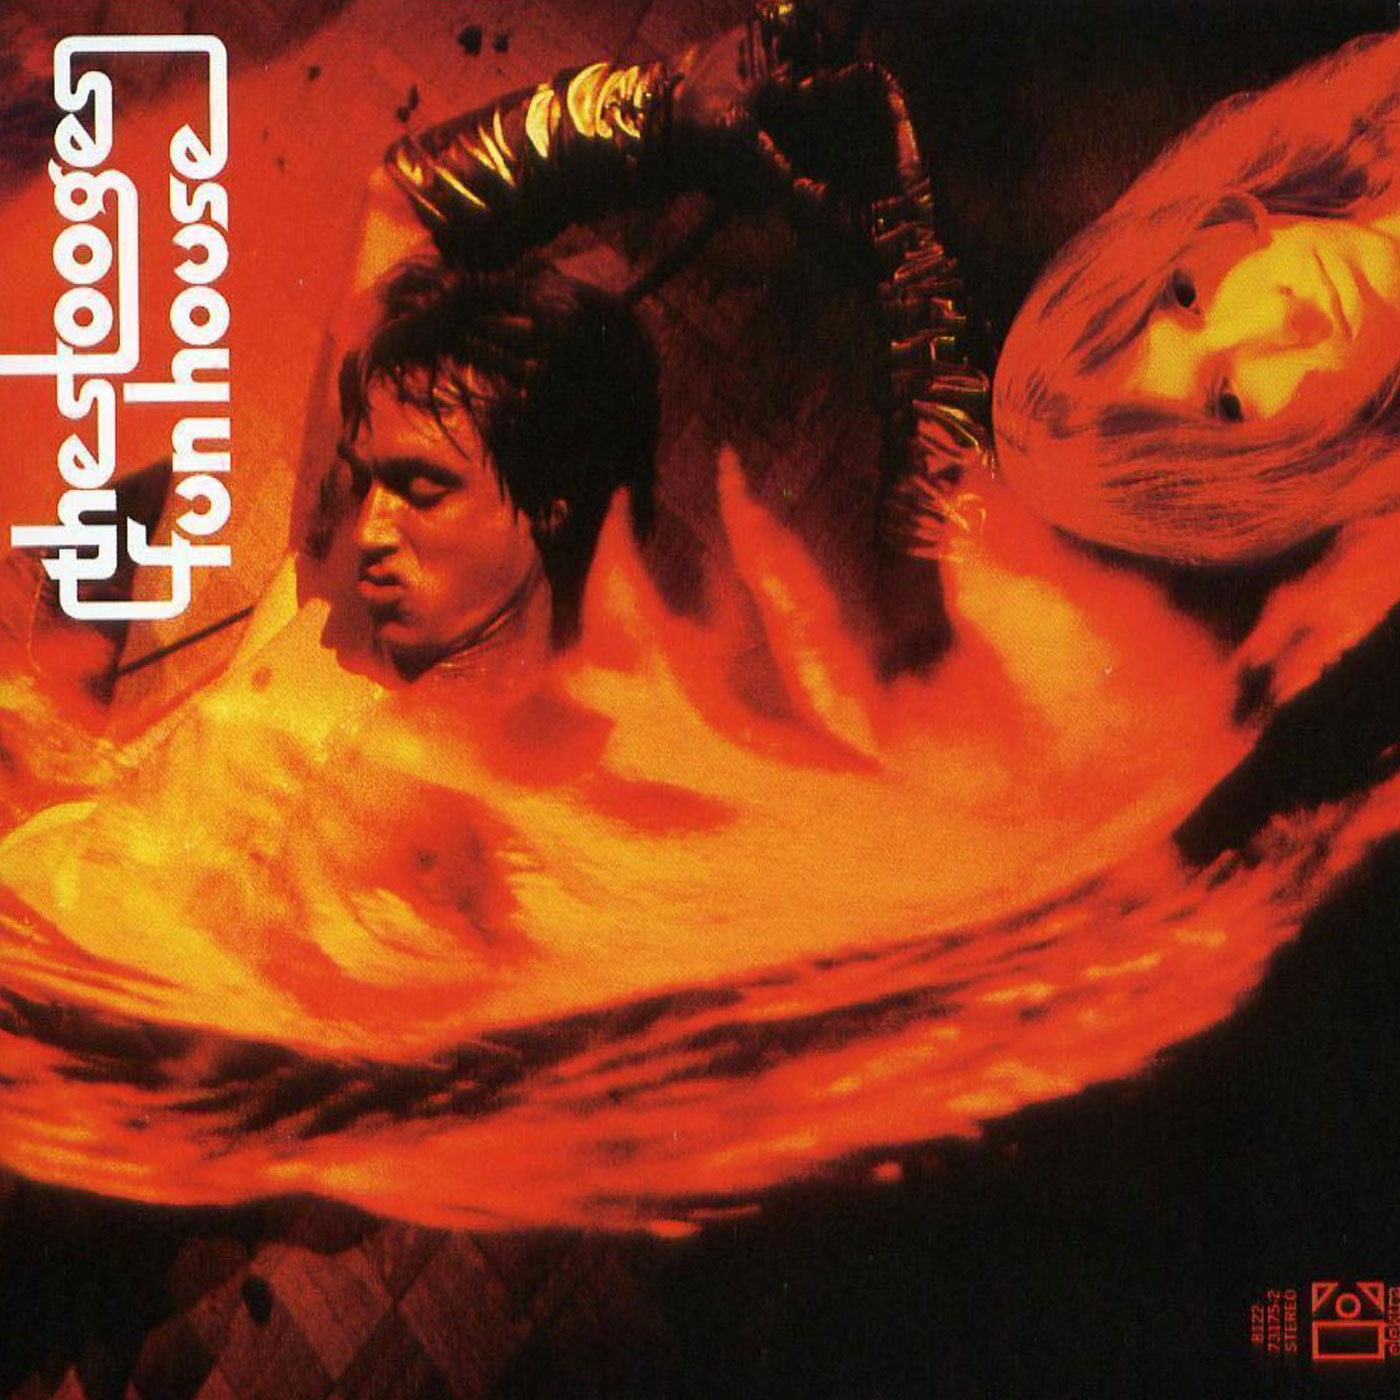 200 The Stooges – Fun House